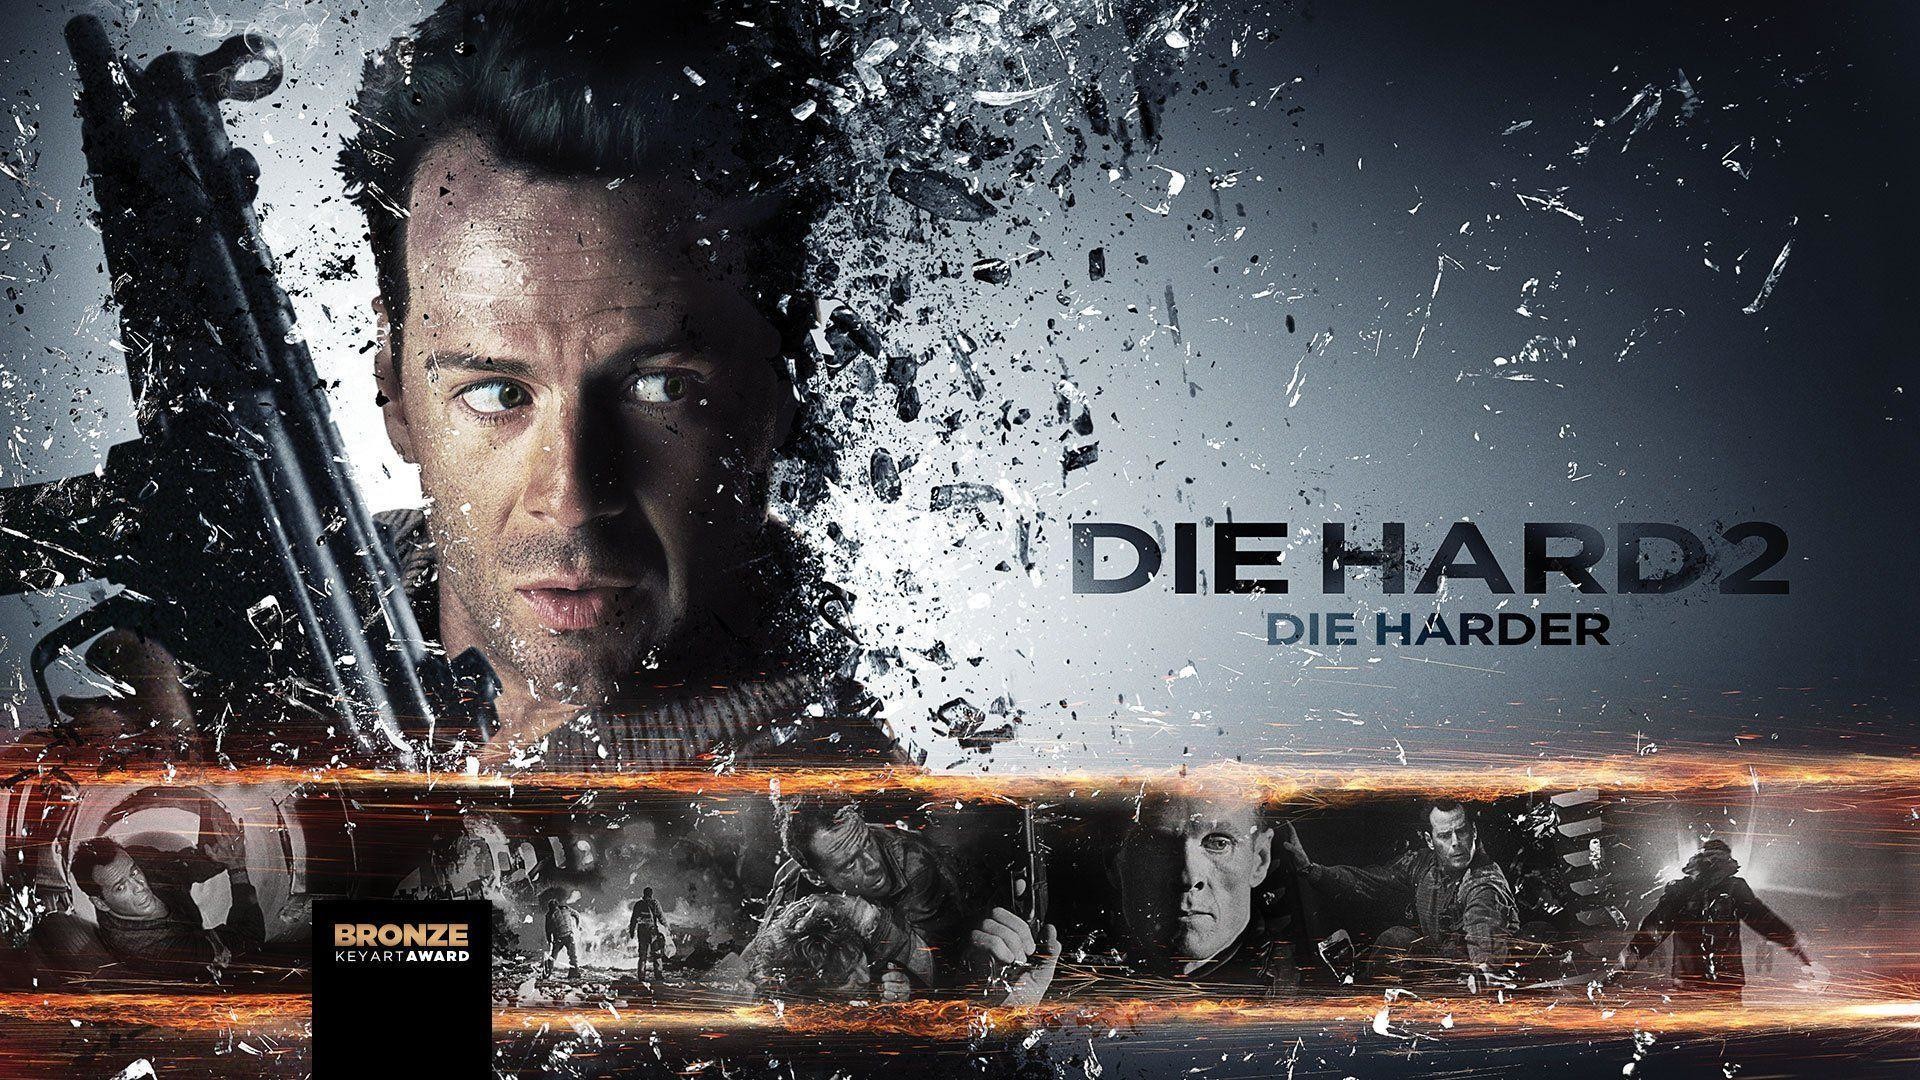 die hard wallpaper,movie,font,photography,album cover,advertising